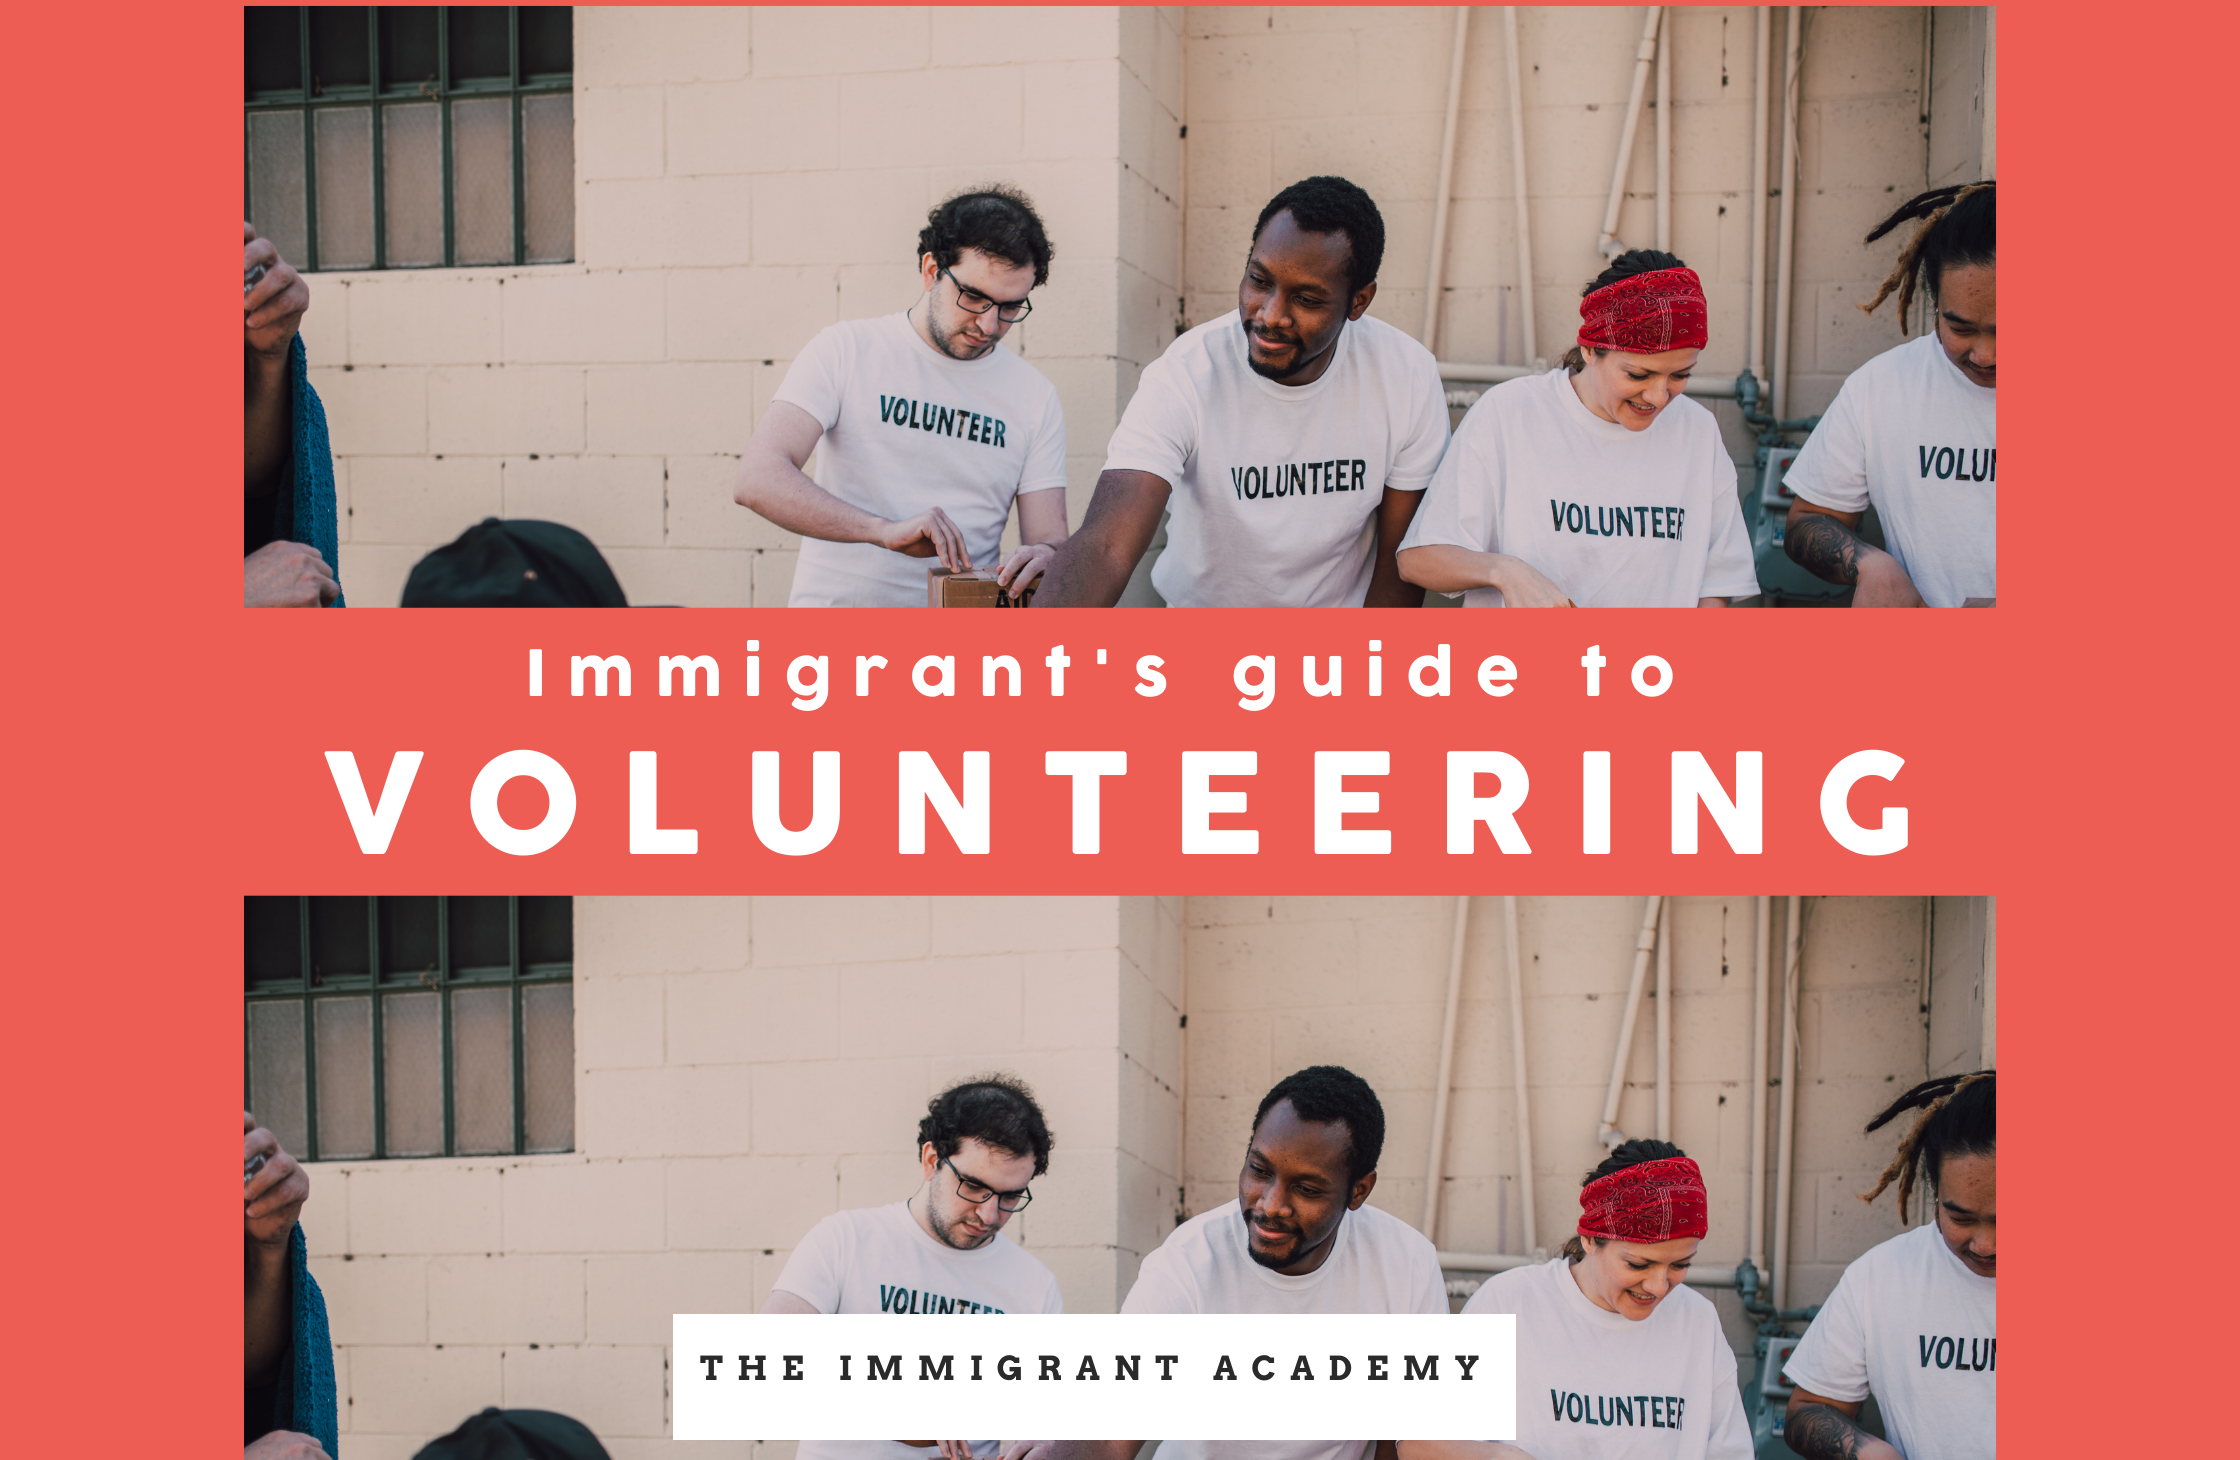 Reasons to volunteer as an immigrant